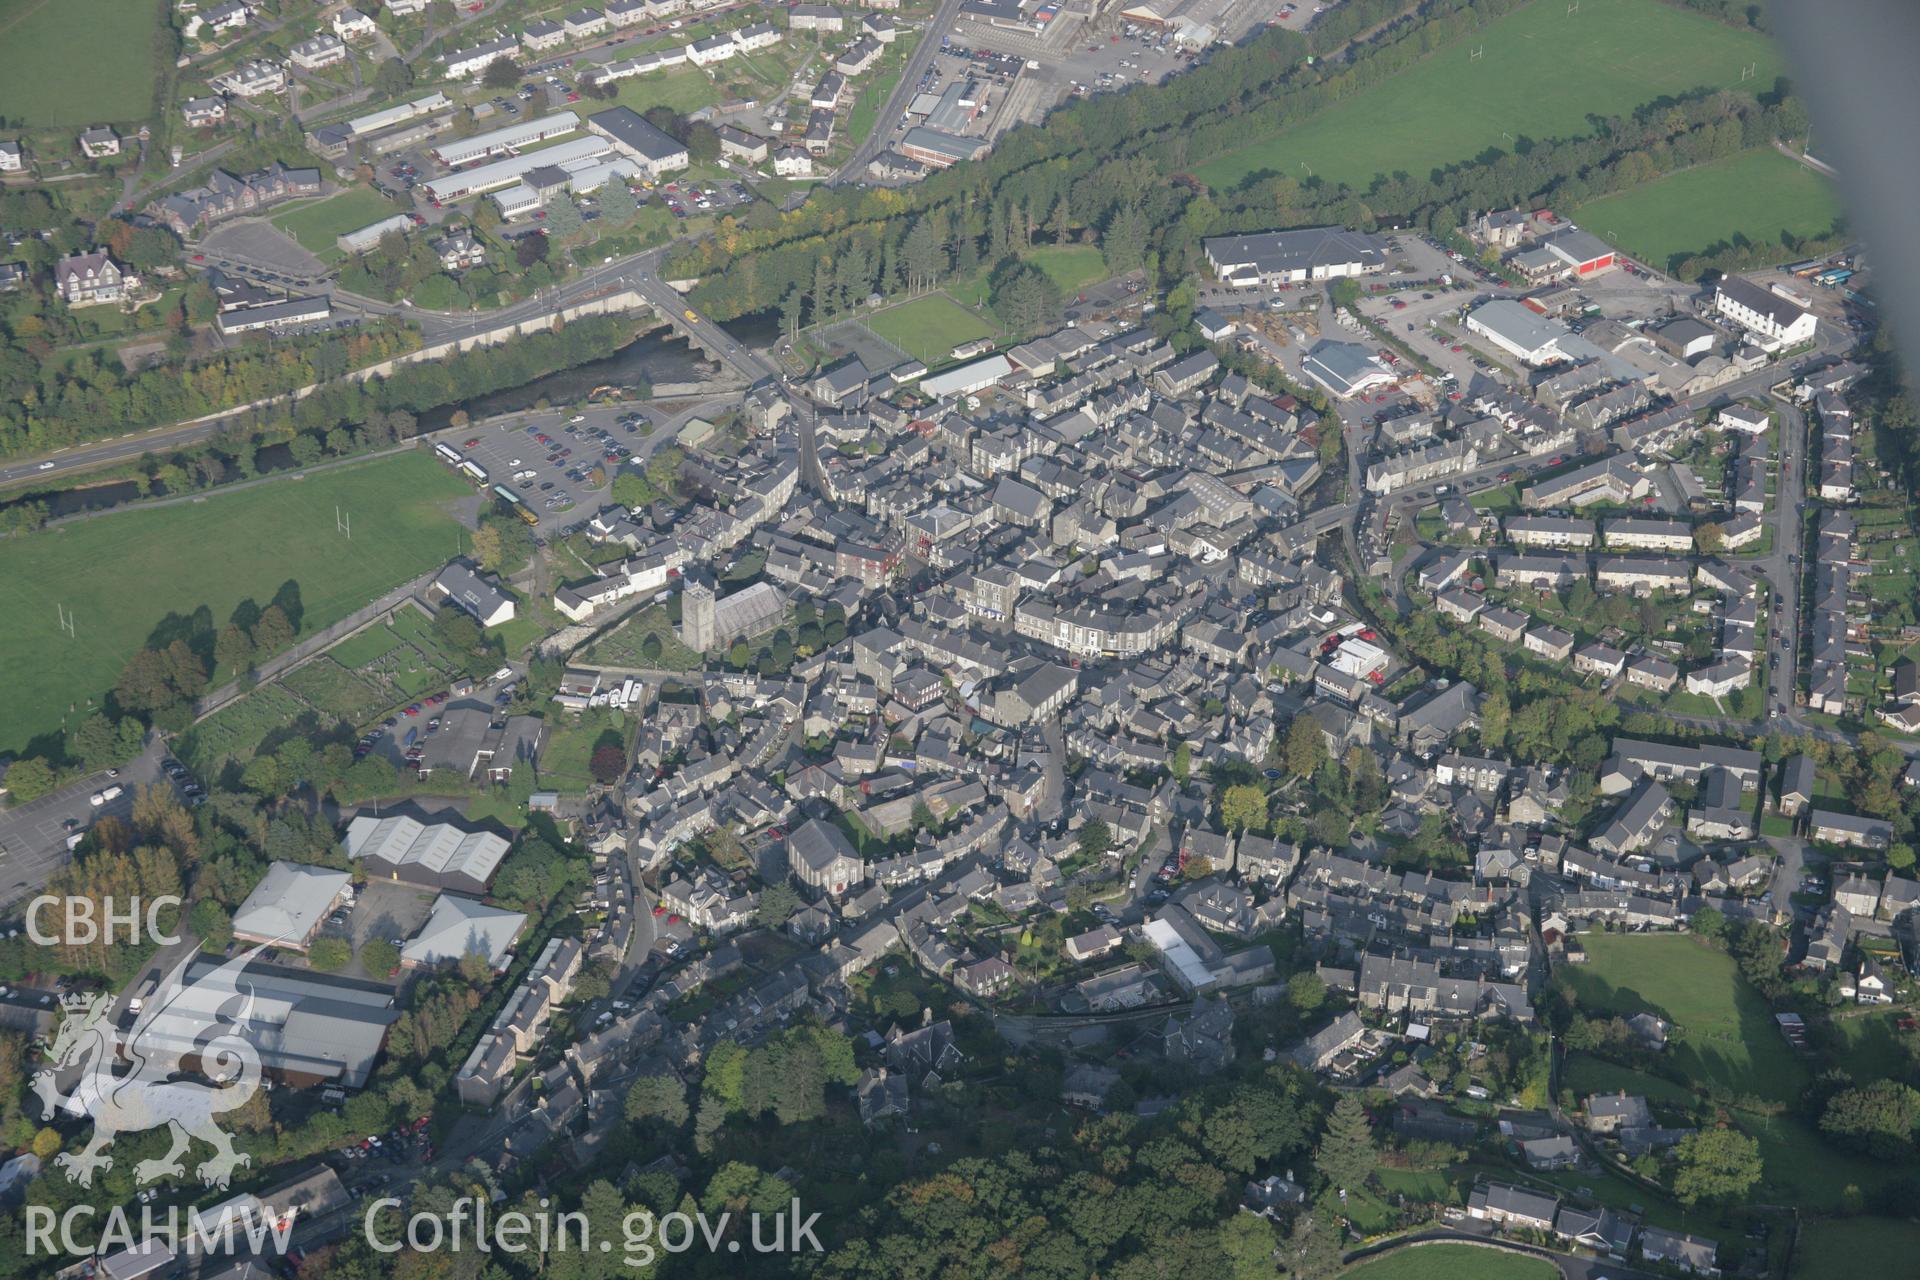 RCAHMW colour oblique aerial photograph of Dolgellau. Taken on 17 October 2005 by Toby Driver